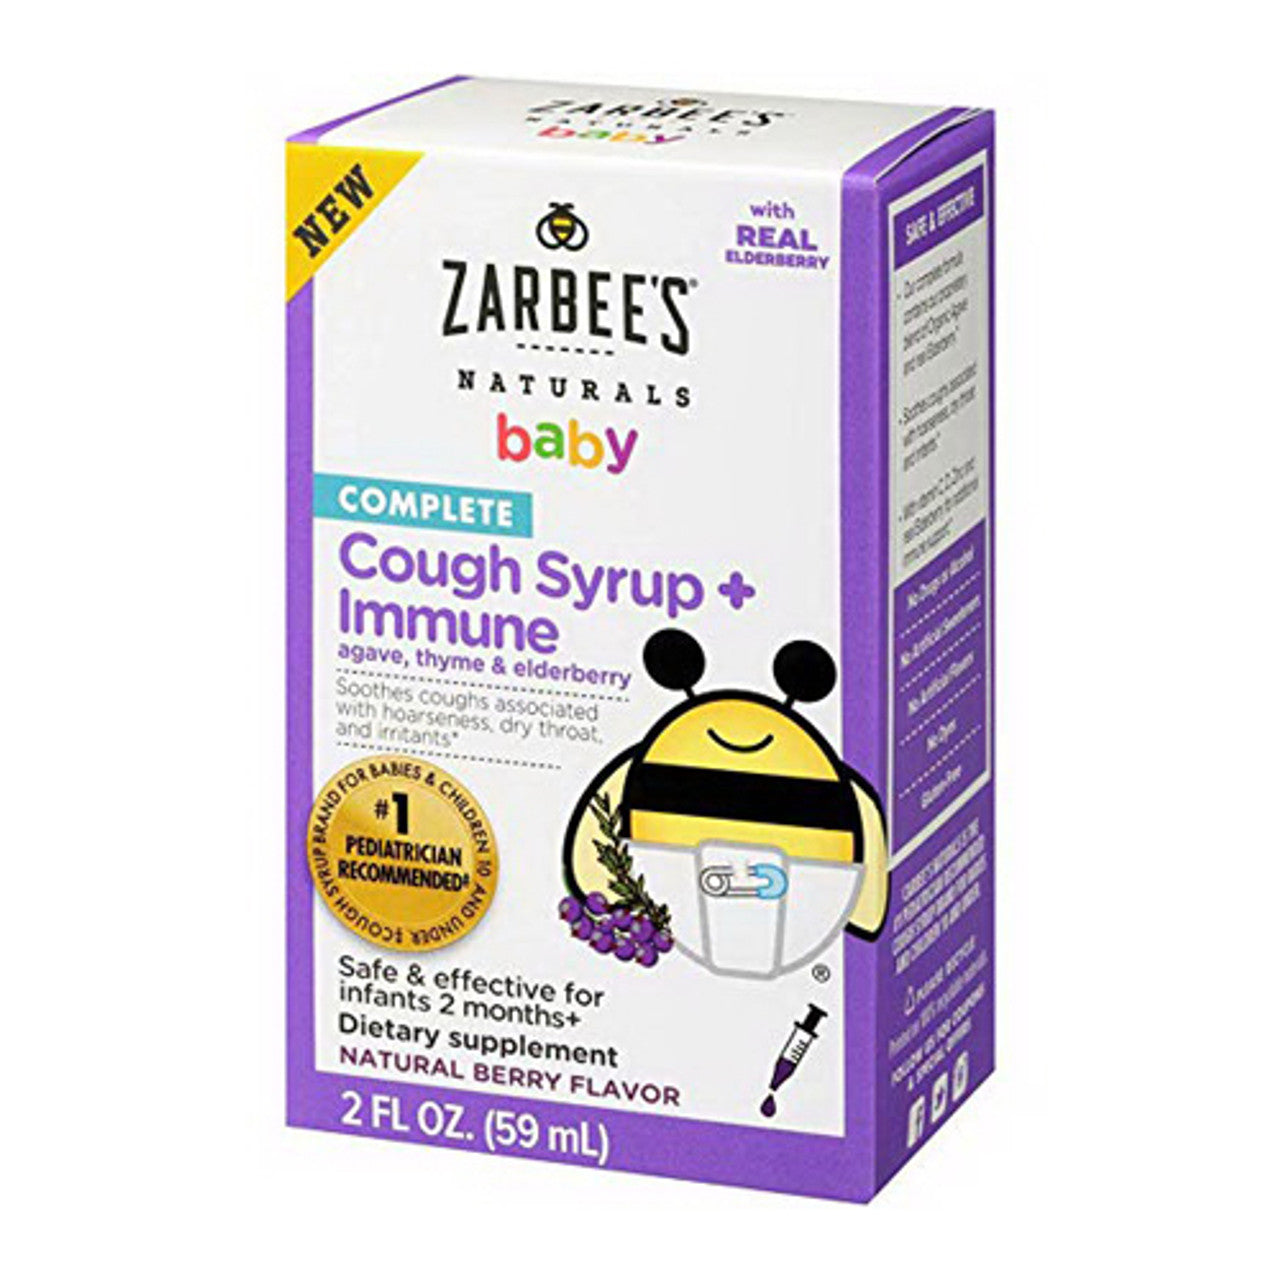 Zarbees Naturals Baby Complete Cough Syrup plus Immune, Berry Flavor, 2 Oz